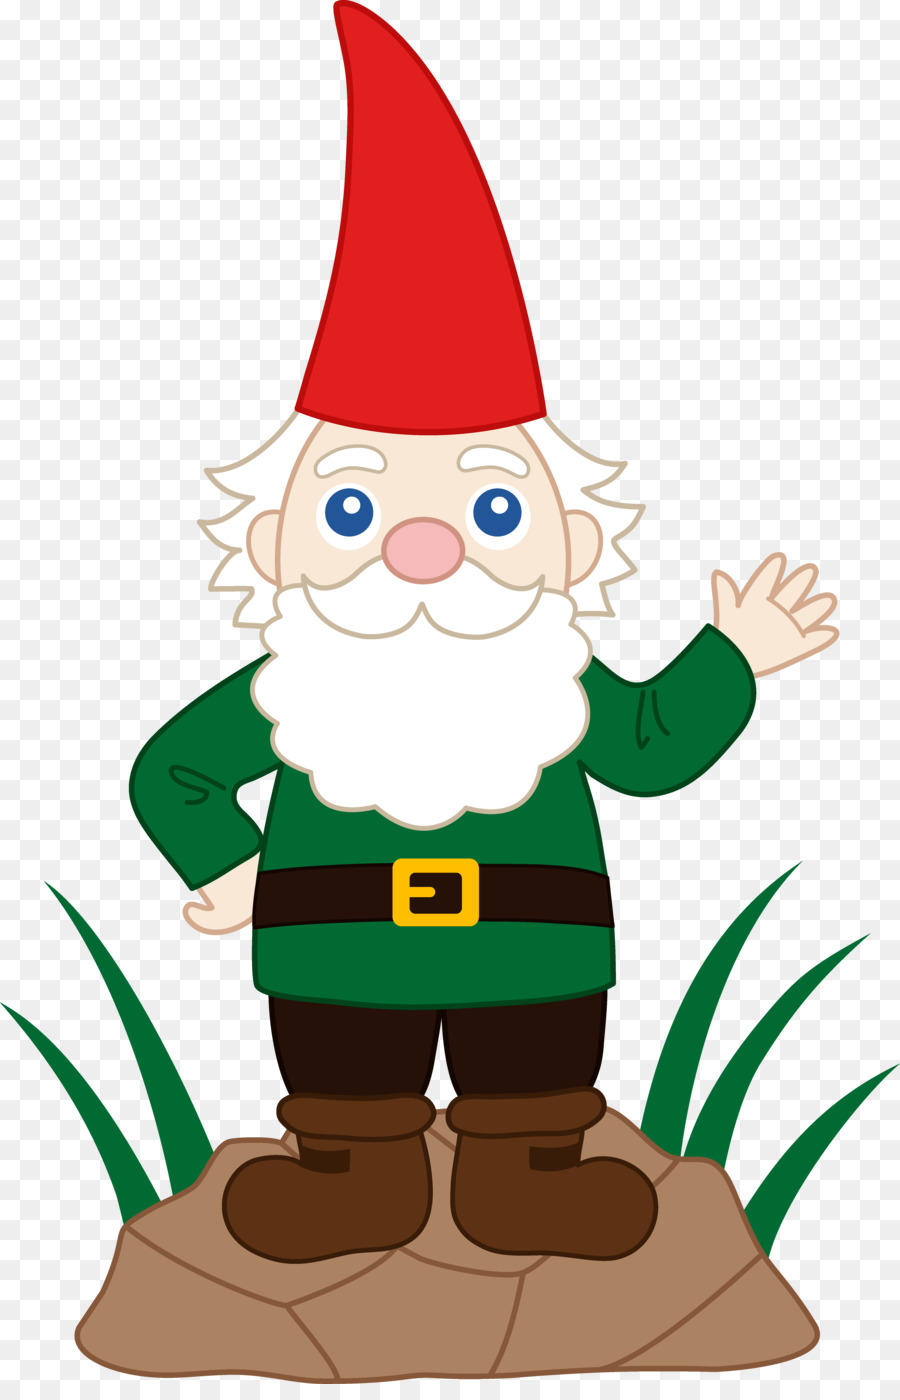 Garden gnome Drawing Clip art - Gnome png download - 5377*8270 - Free Transparent Garden Gnome png Download.